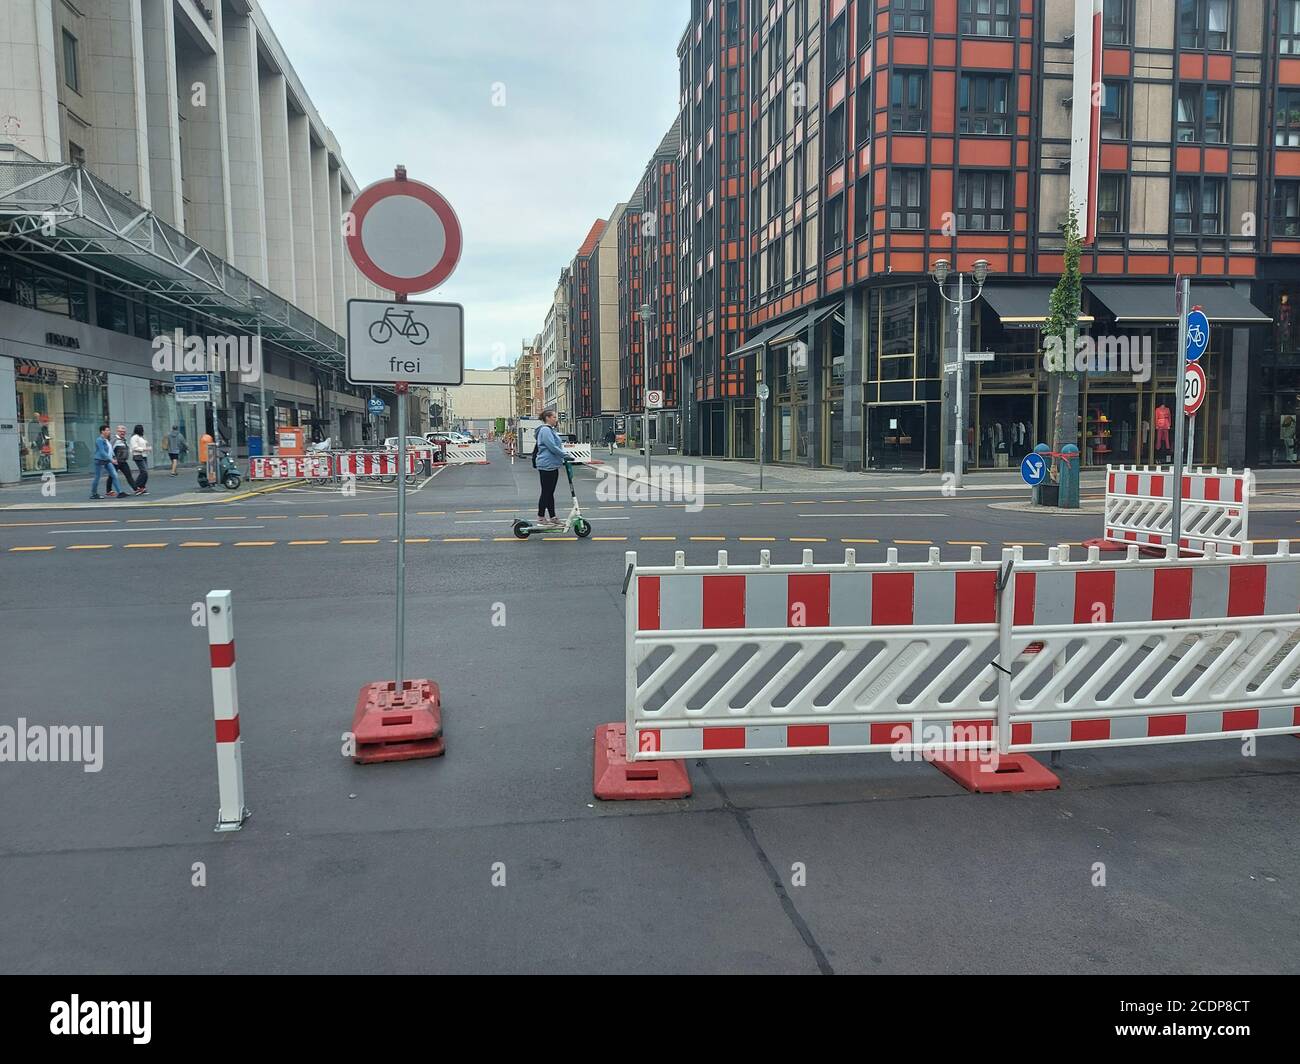 Berlin, Germany. 29th Aug, 2020. FriedrichstraSe (Friedrichstrasse) street in Berlin, Germany, on August 29, 2020. Until the end of January 2021, about half-kilometer section of one of the most famous streets in Berlin will be reserved exclusively for pedestrians and cyclists. The city wants to verify the extent to which this measure will increase the quality of life in public space. Credit: Ales Zapotocky/CTK Photo/Alamy Live News Stock Photo